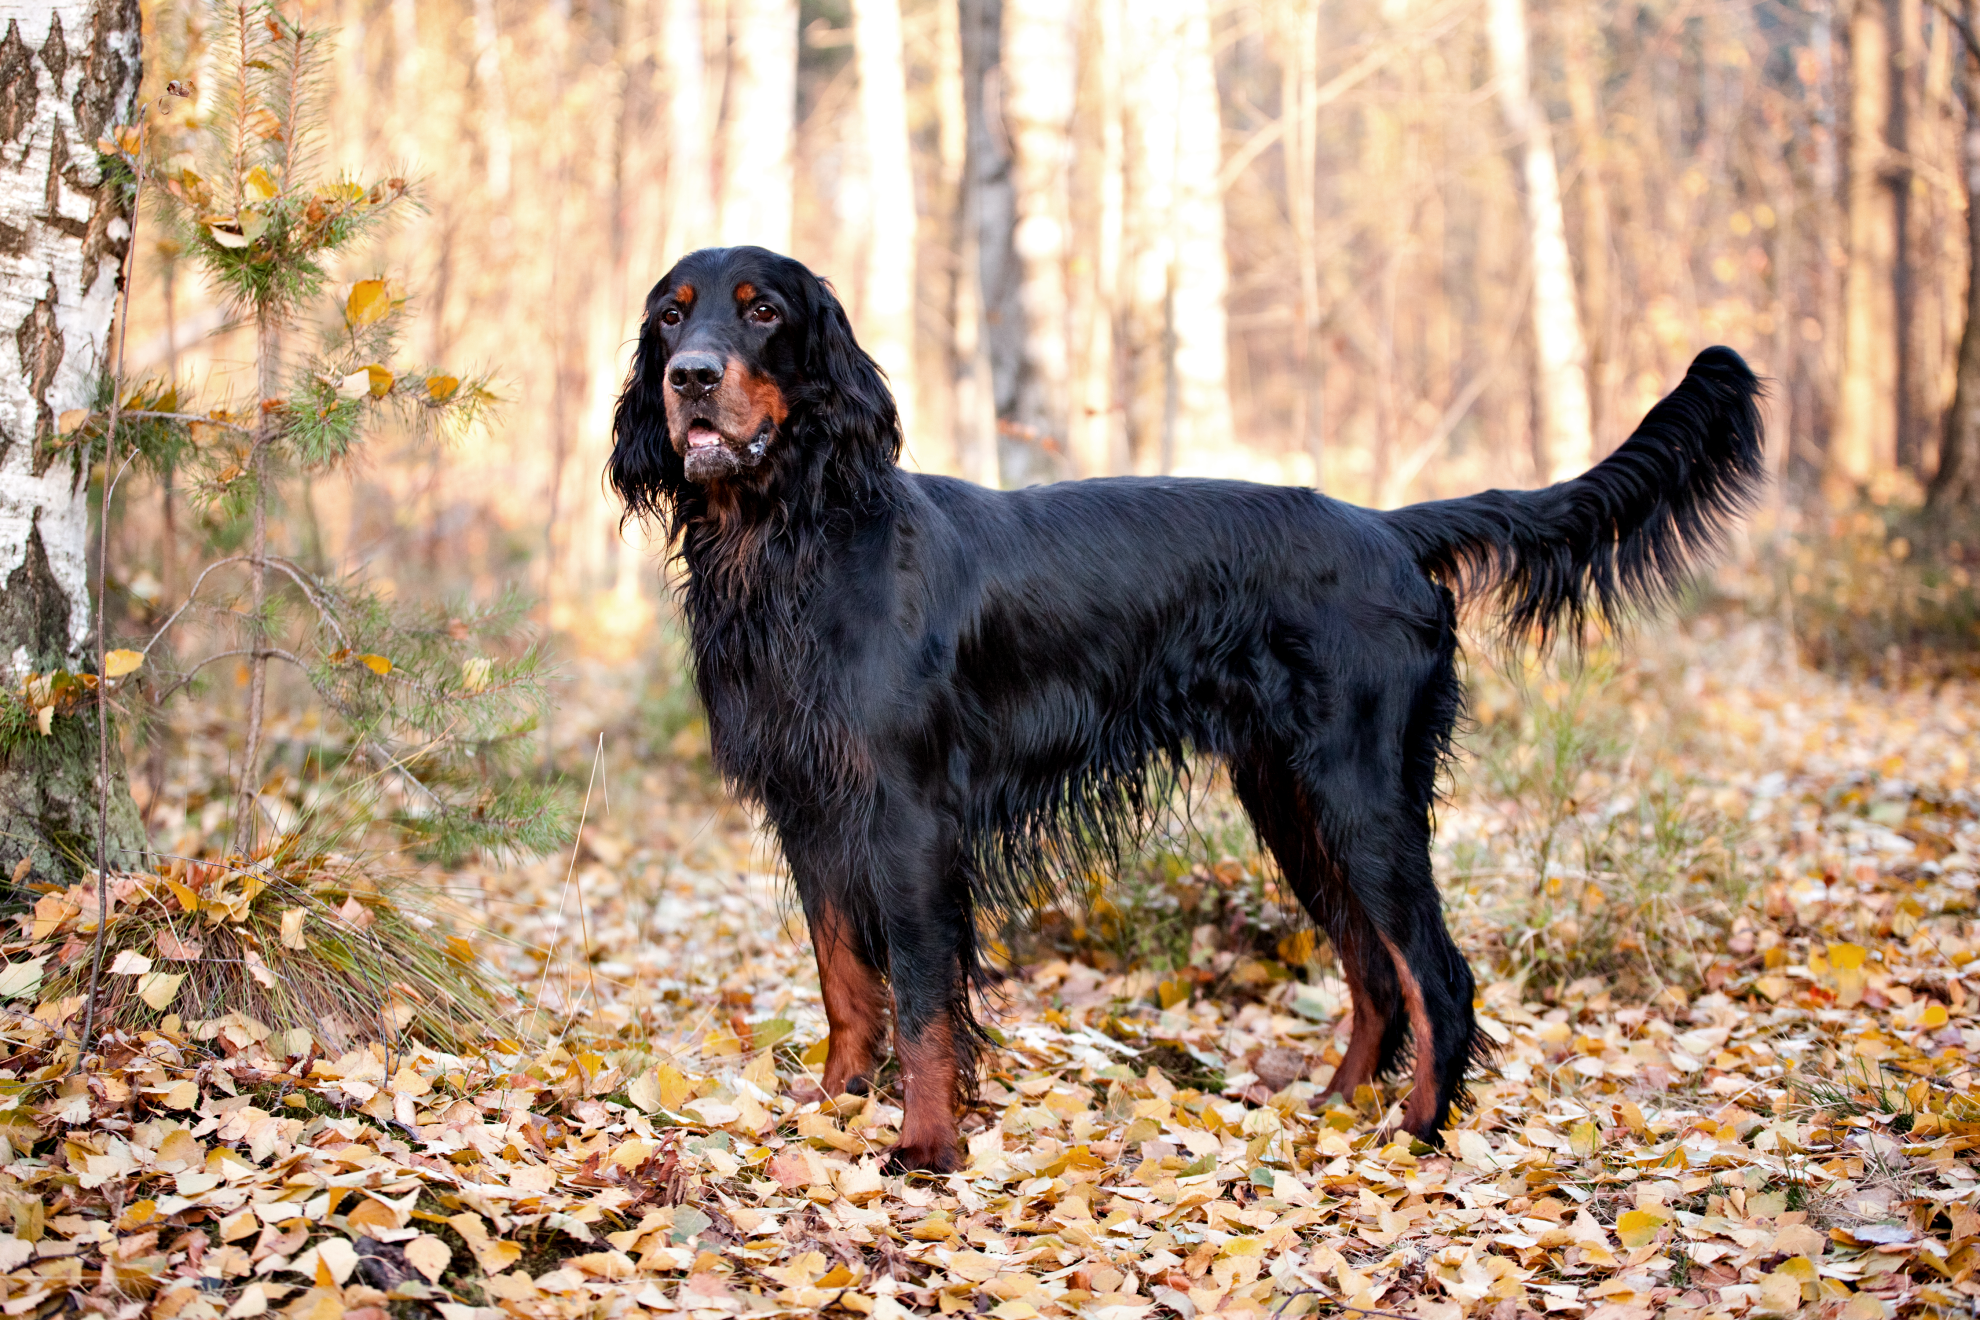 Gordon Setter stood alert in a forest, leaves on the ground